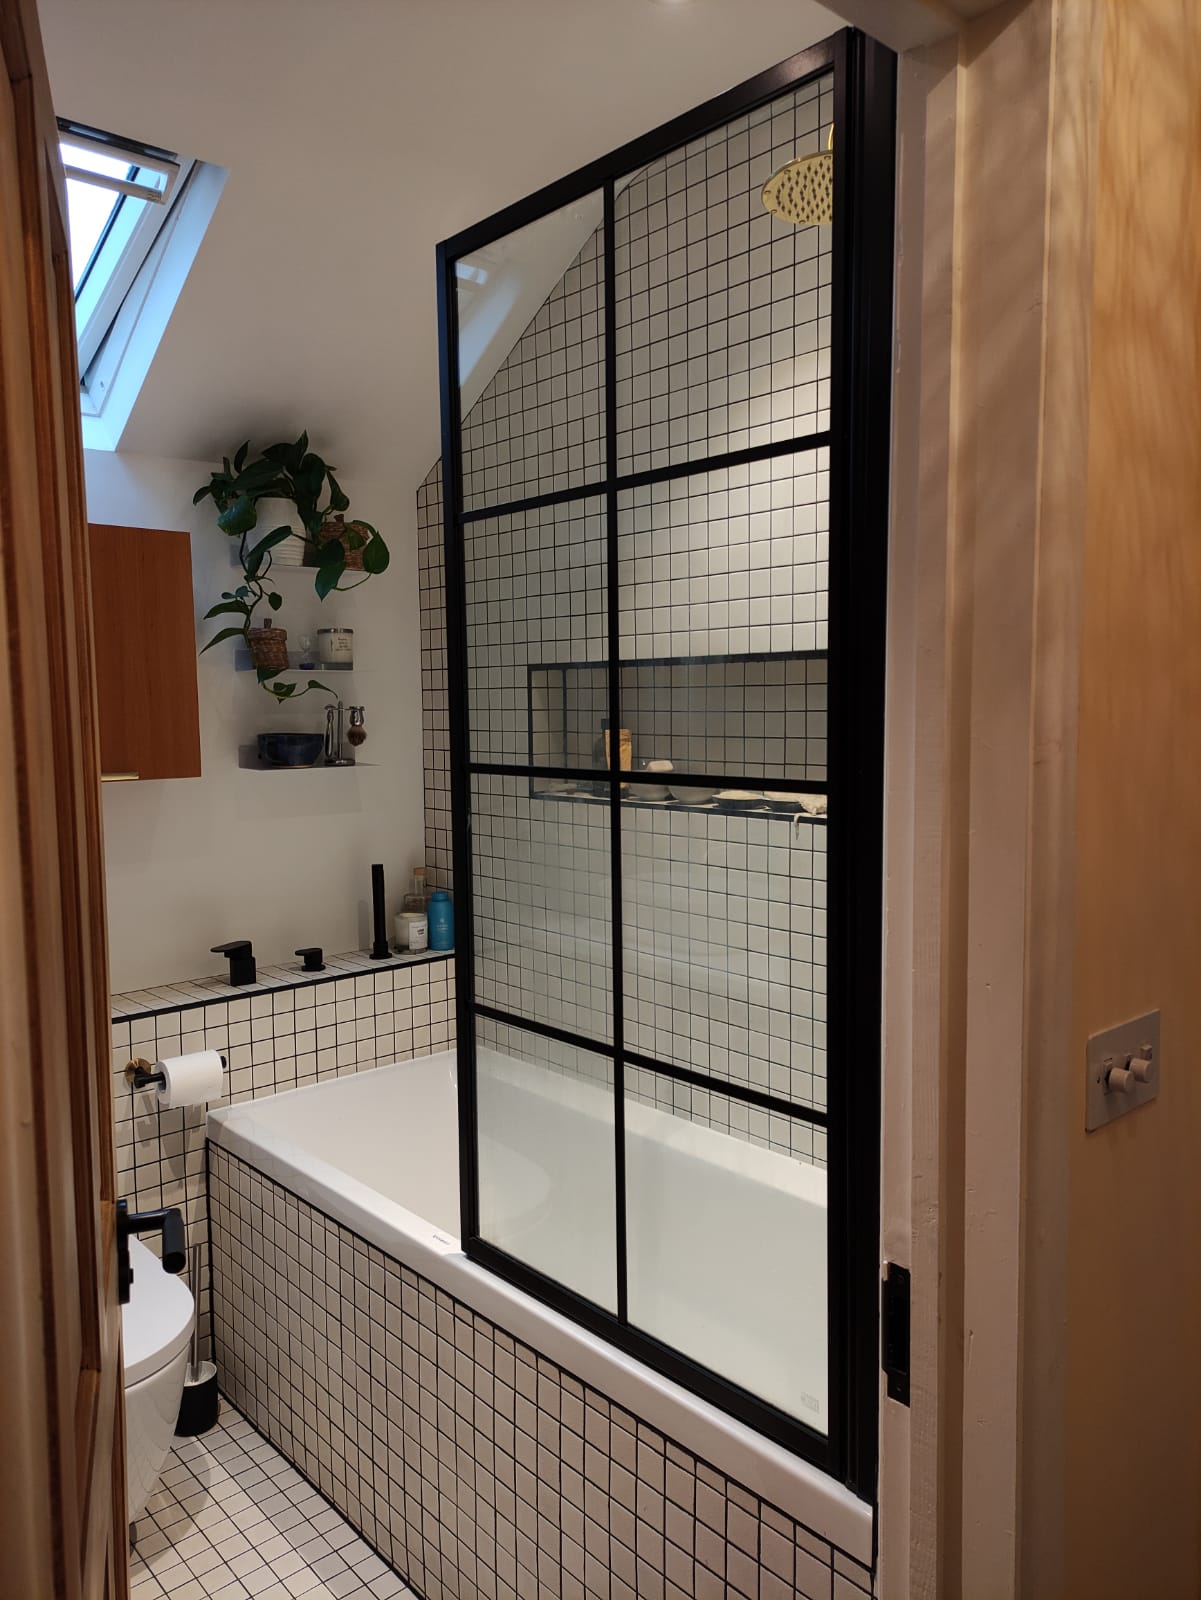 A photo of the finished space showing the shower screen.